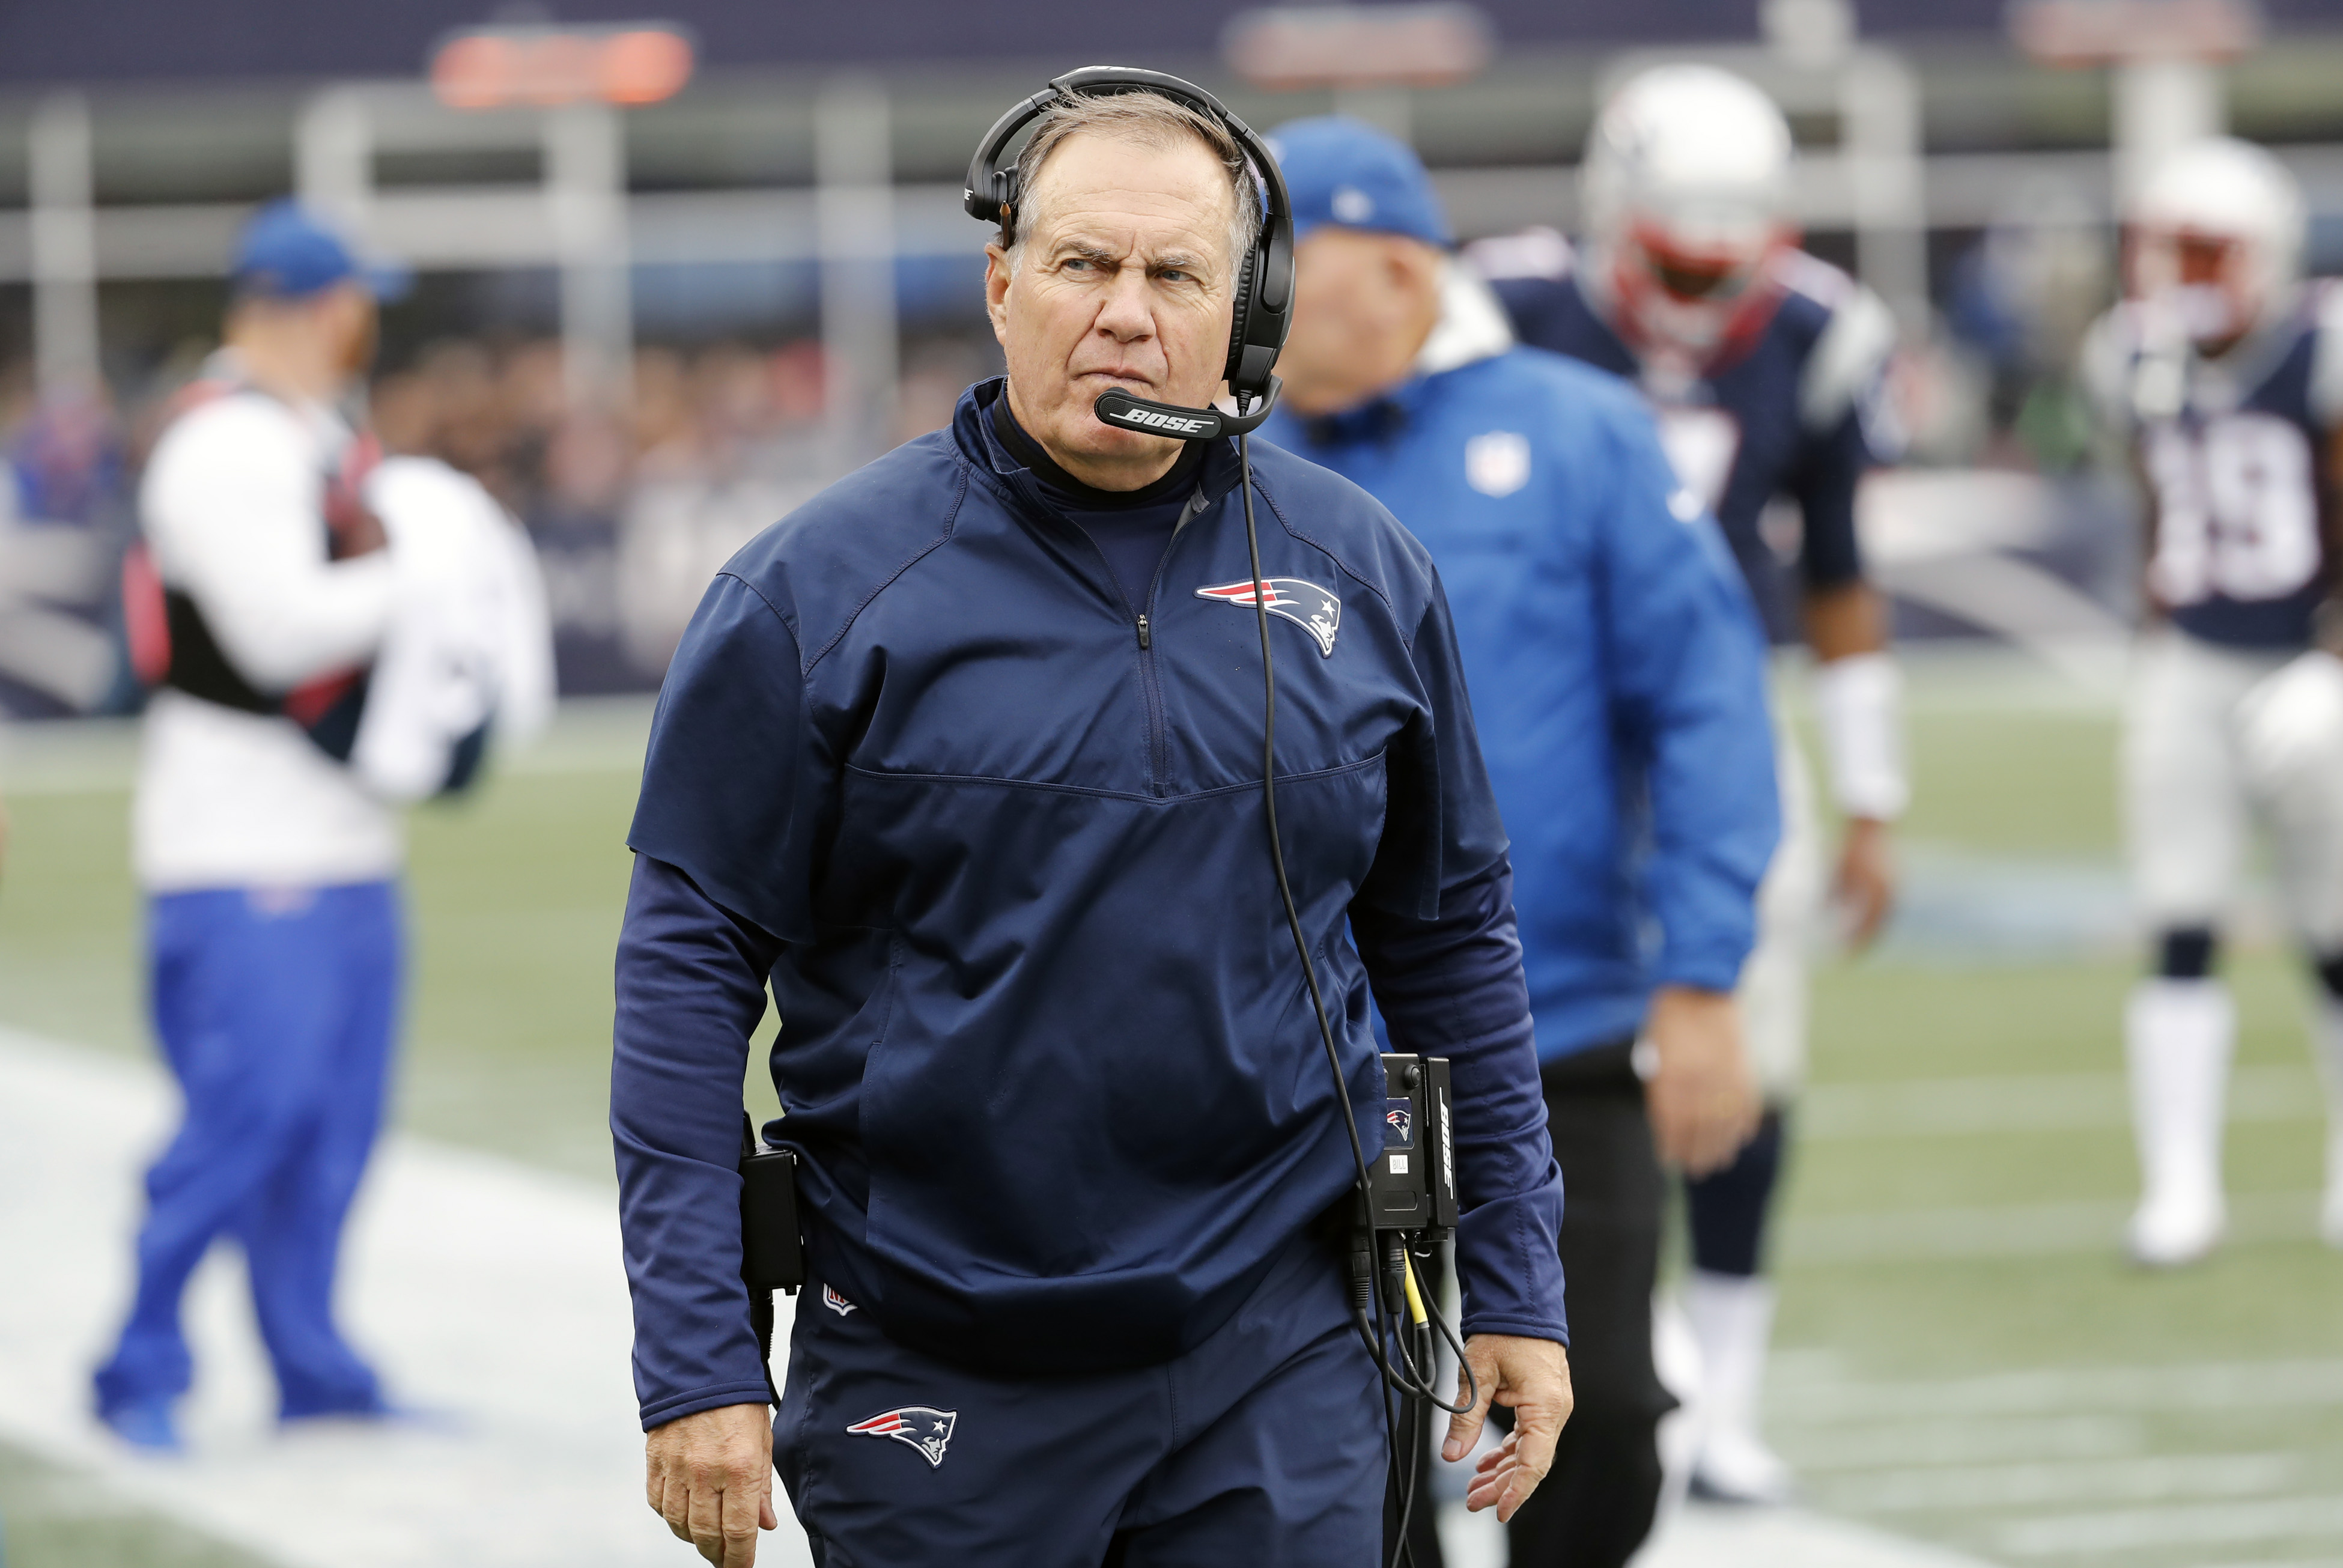 Bill Belichick scowls on the sideline during a game